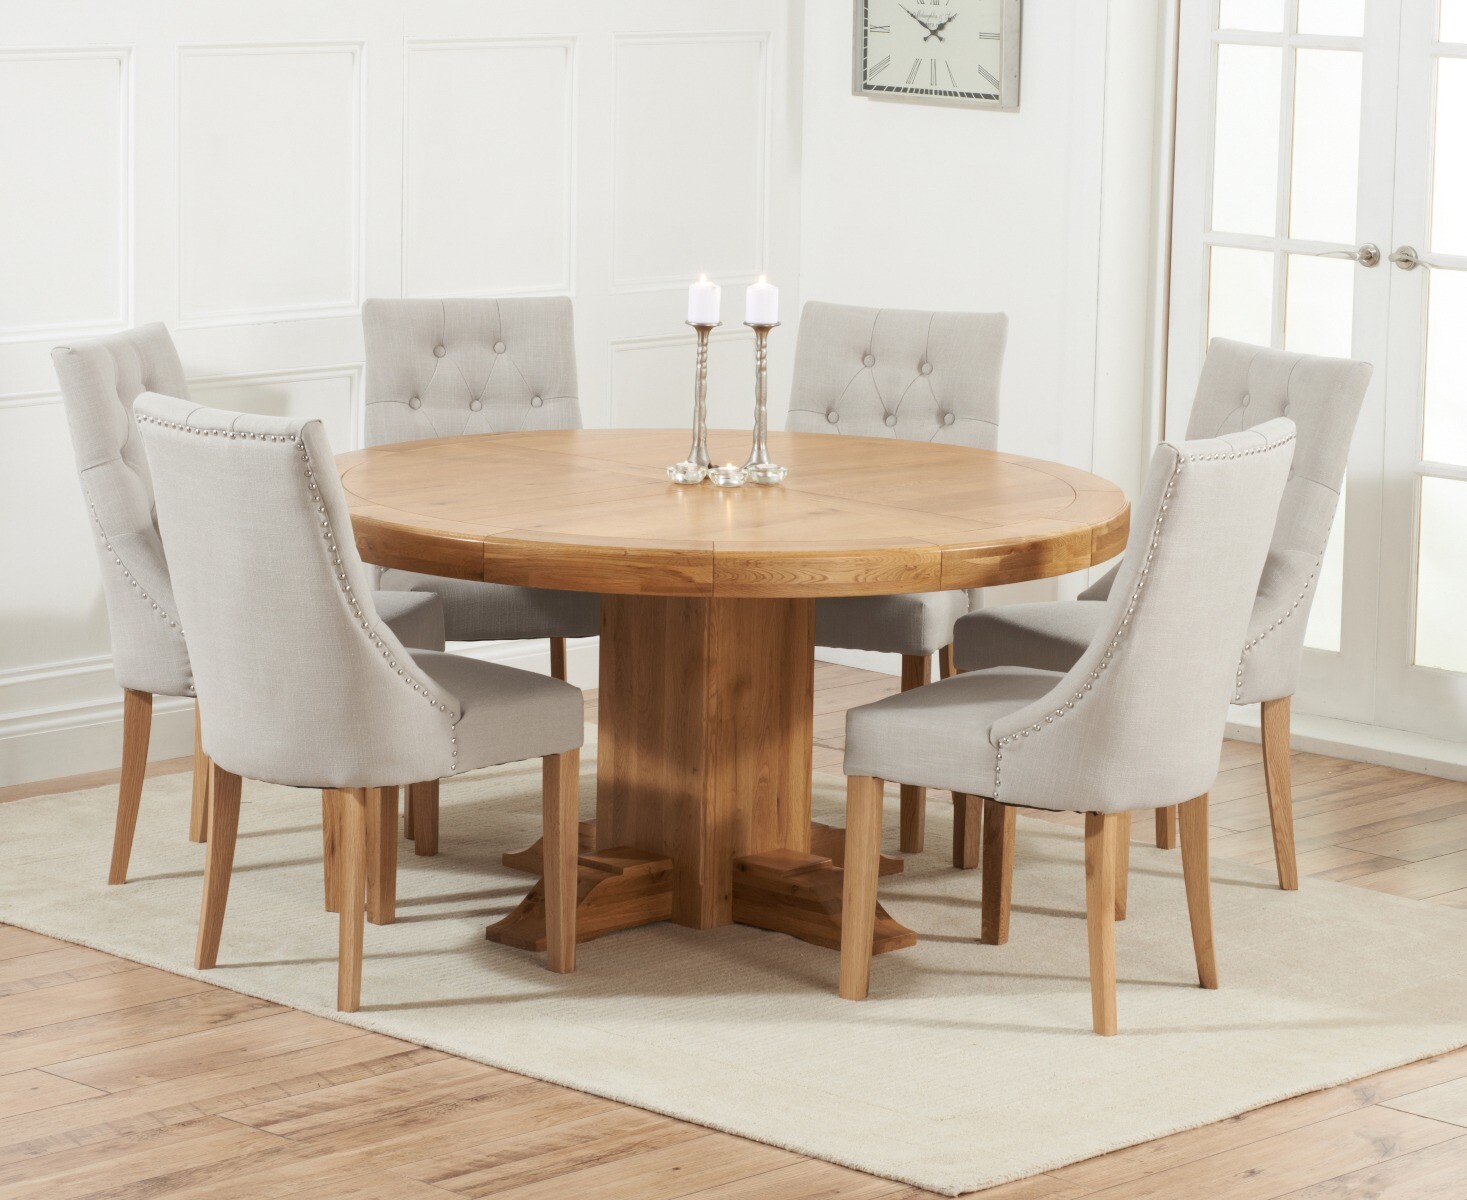 Photo 2 of Helmsley 150cm round oak dining table with 6 grey beatrix chairs